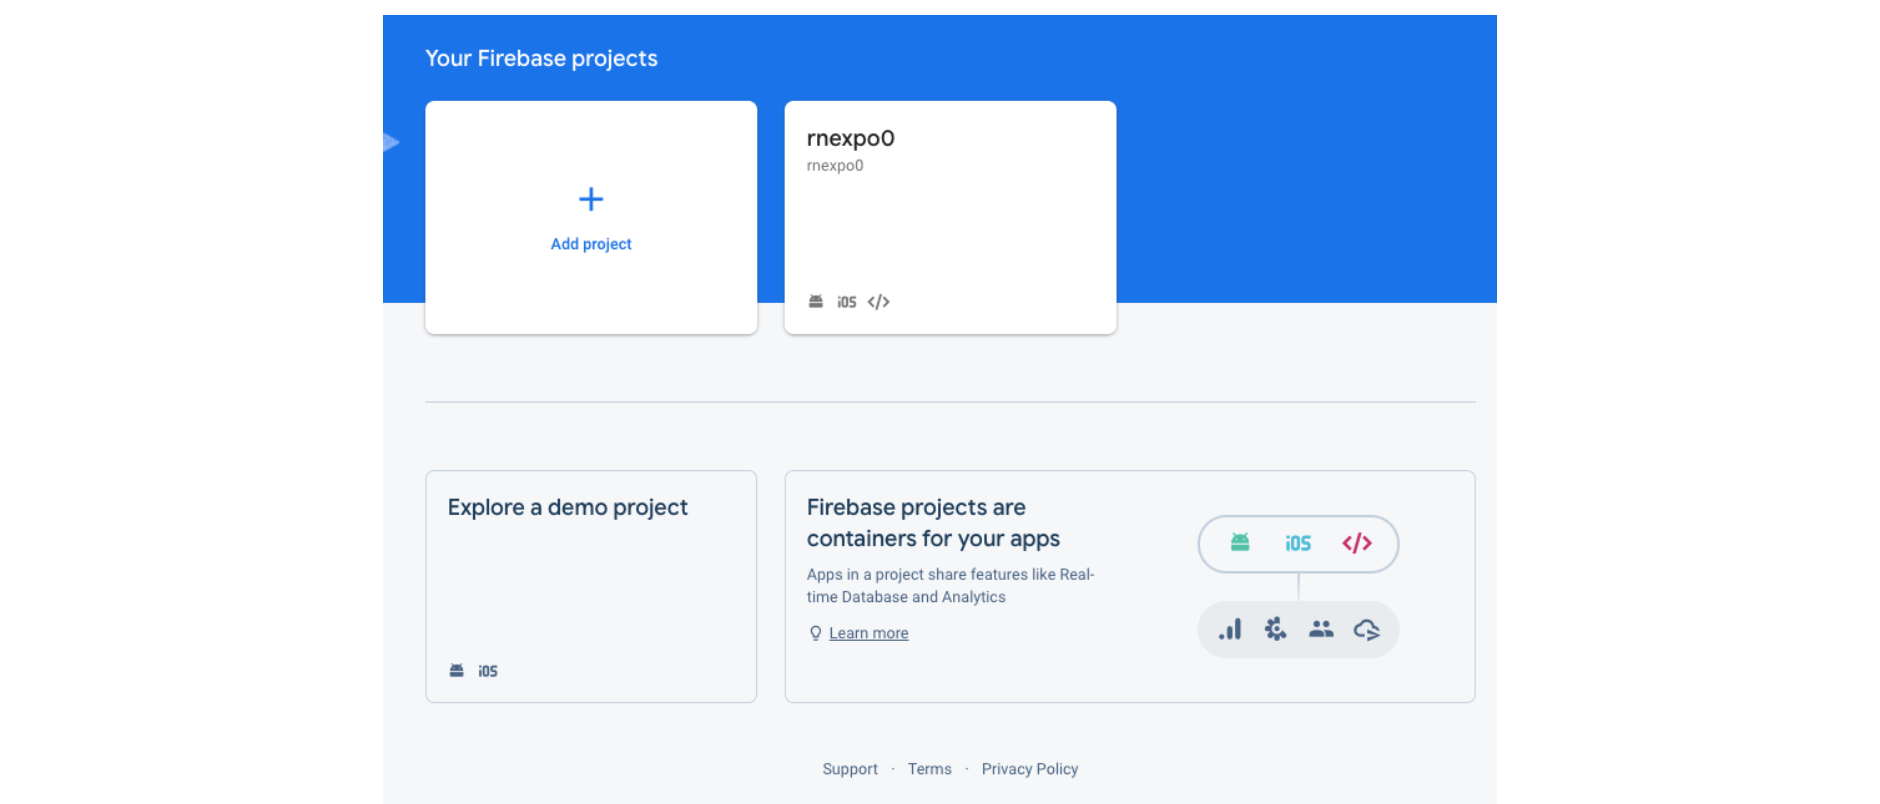 new-firebase-project-from-firebase-console